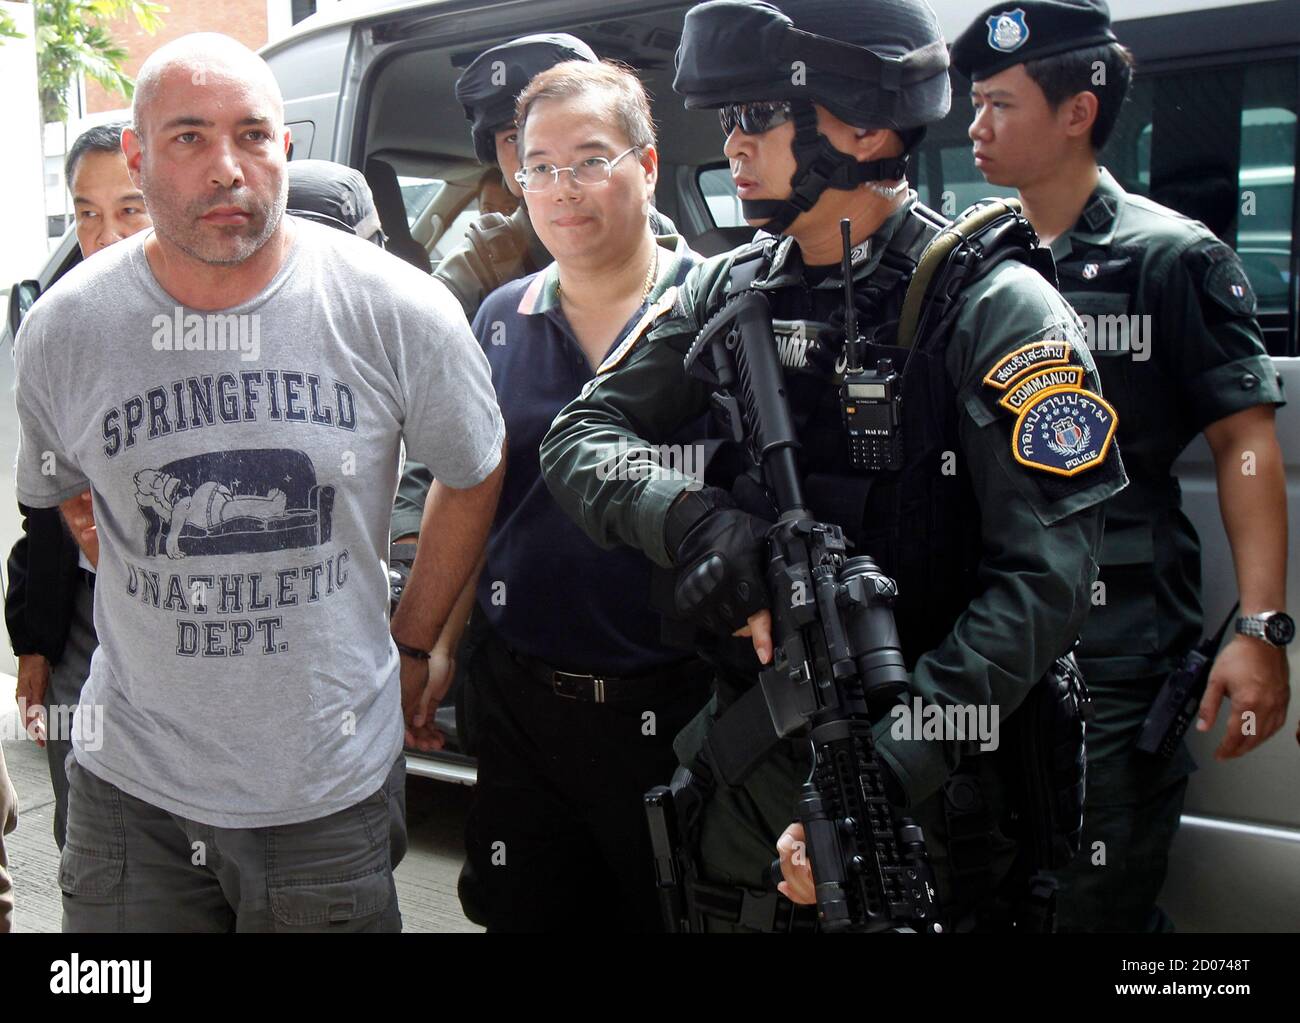 Thai policemen escort American drug suspect Joseph Hunter, 48, as he arrives at Don Mueang International Airport in Bangkok September 27, 2013. Thai police transferred six foreigners suspected of drug smuggling to Bangkok on Thursday after their arrests in the seaside resort, Phuket. Hunter, along with two British, a Taiwanese, a Slovak, and a Filipino were arrested on Phuket island on Wednesday following a tip-off from the United States Drug Enforcement Administration (DEA).   REUTERS/Chaiwat Subprasom (THAILAND - Tags: CRIME LAW DRUGS SOCIETY) Stock Photo